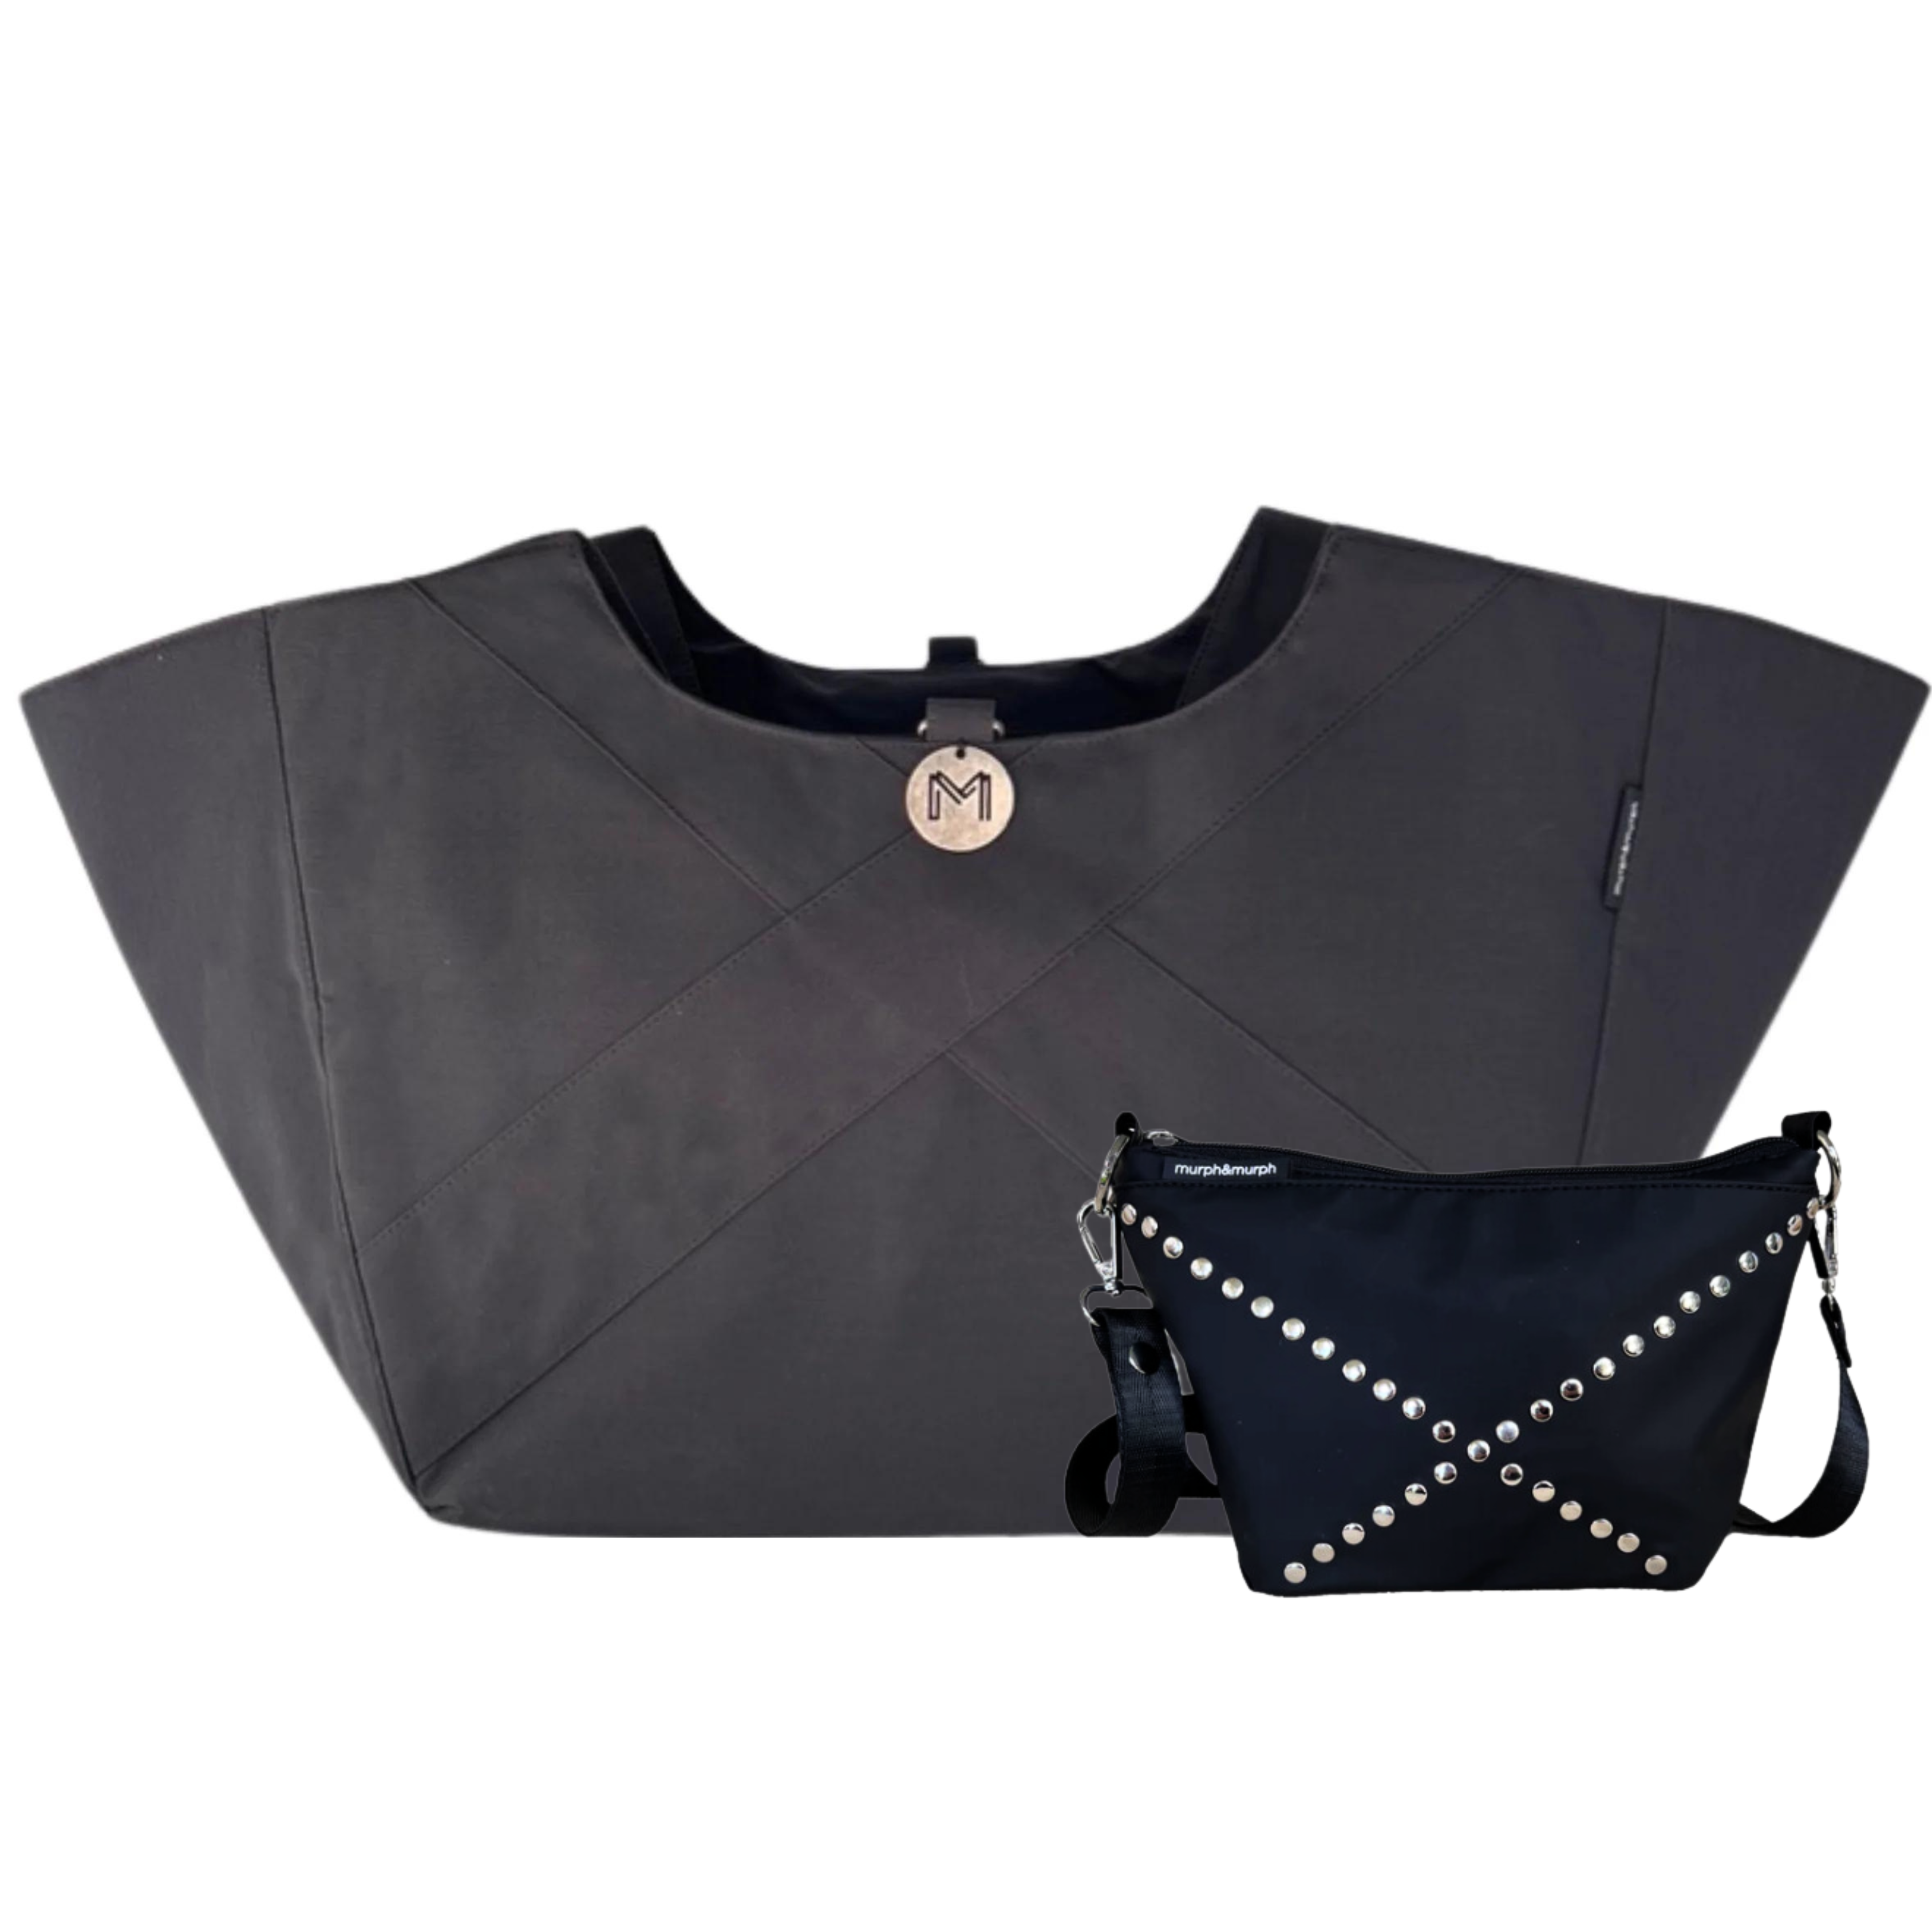 Cove Carry-All - Charcoal Grey (FREE Petite for Mother's Day! SAVE $119)